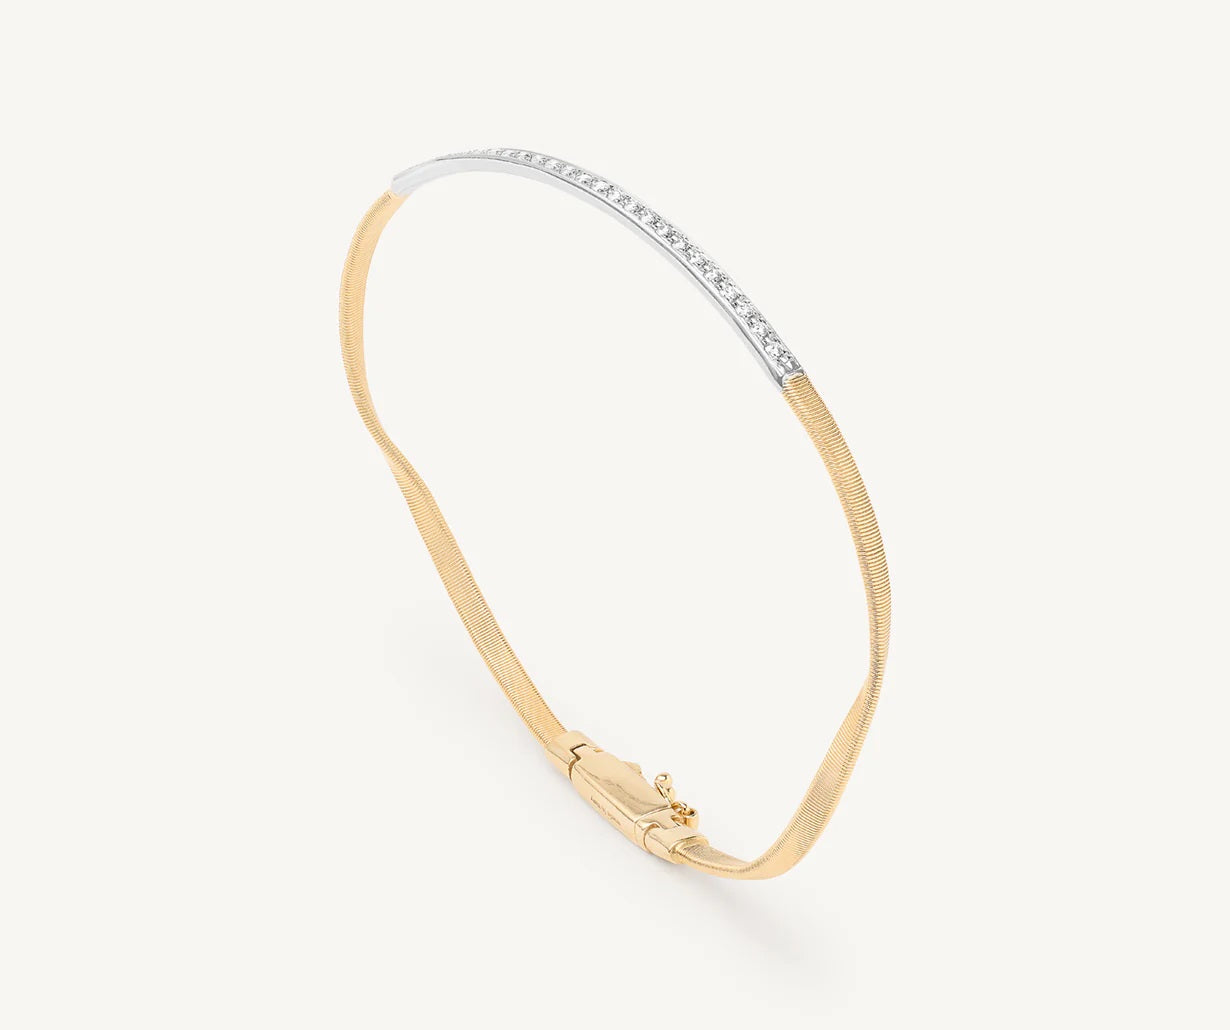 18K YELLOW GOLD BANGLE WITH DIAMOND BAR FROM THE MARRAKECH COLLECTION